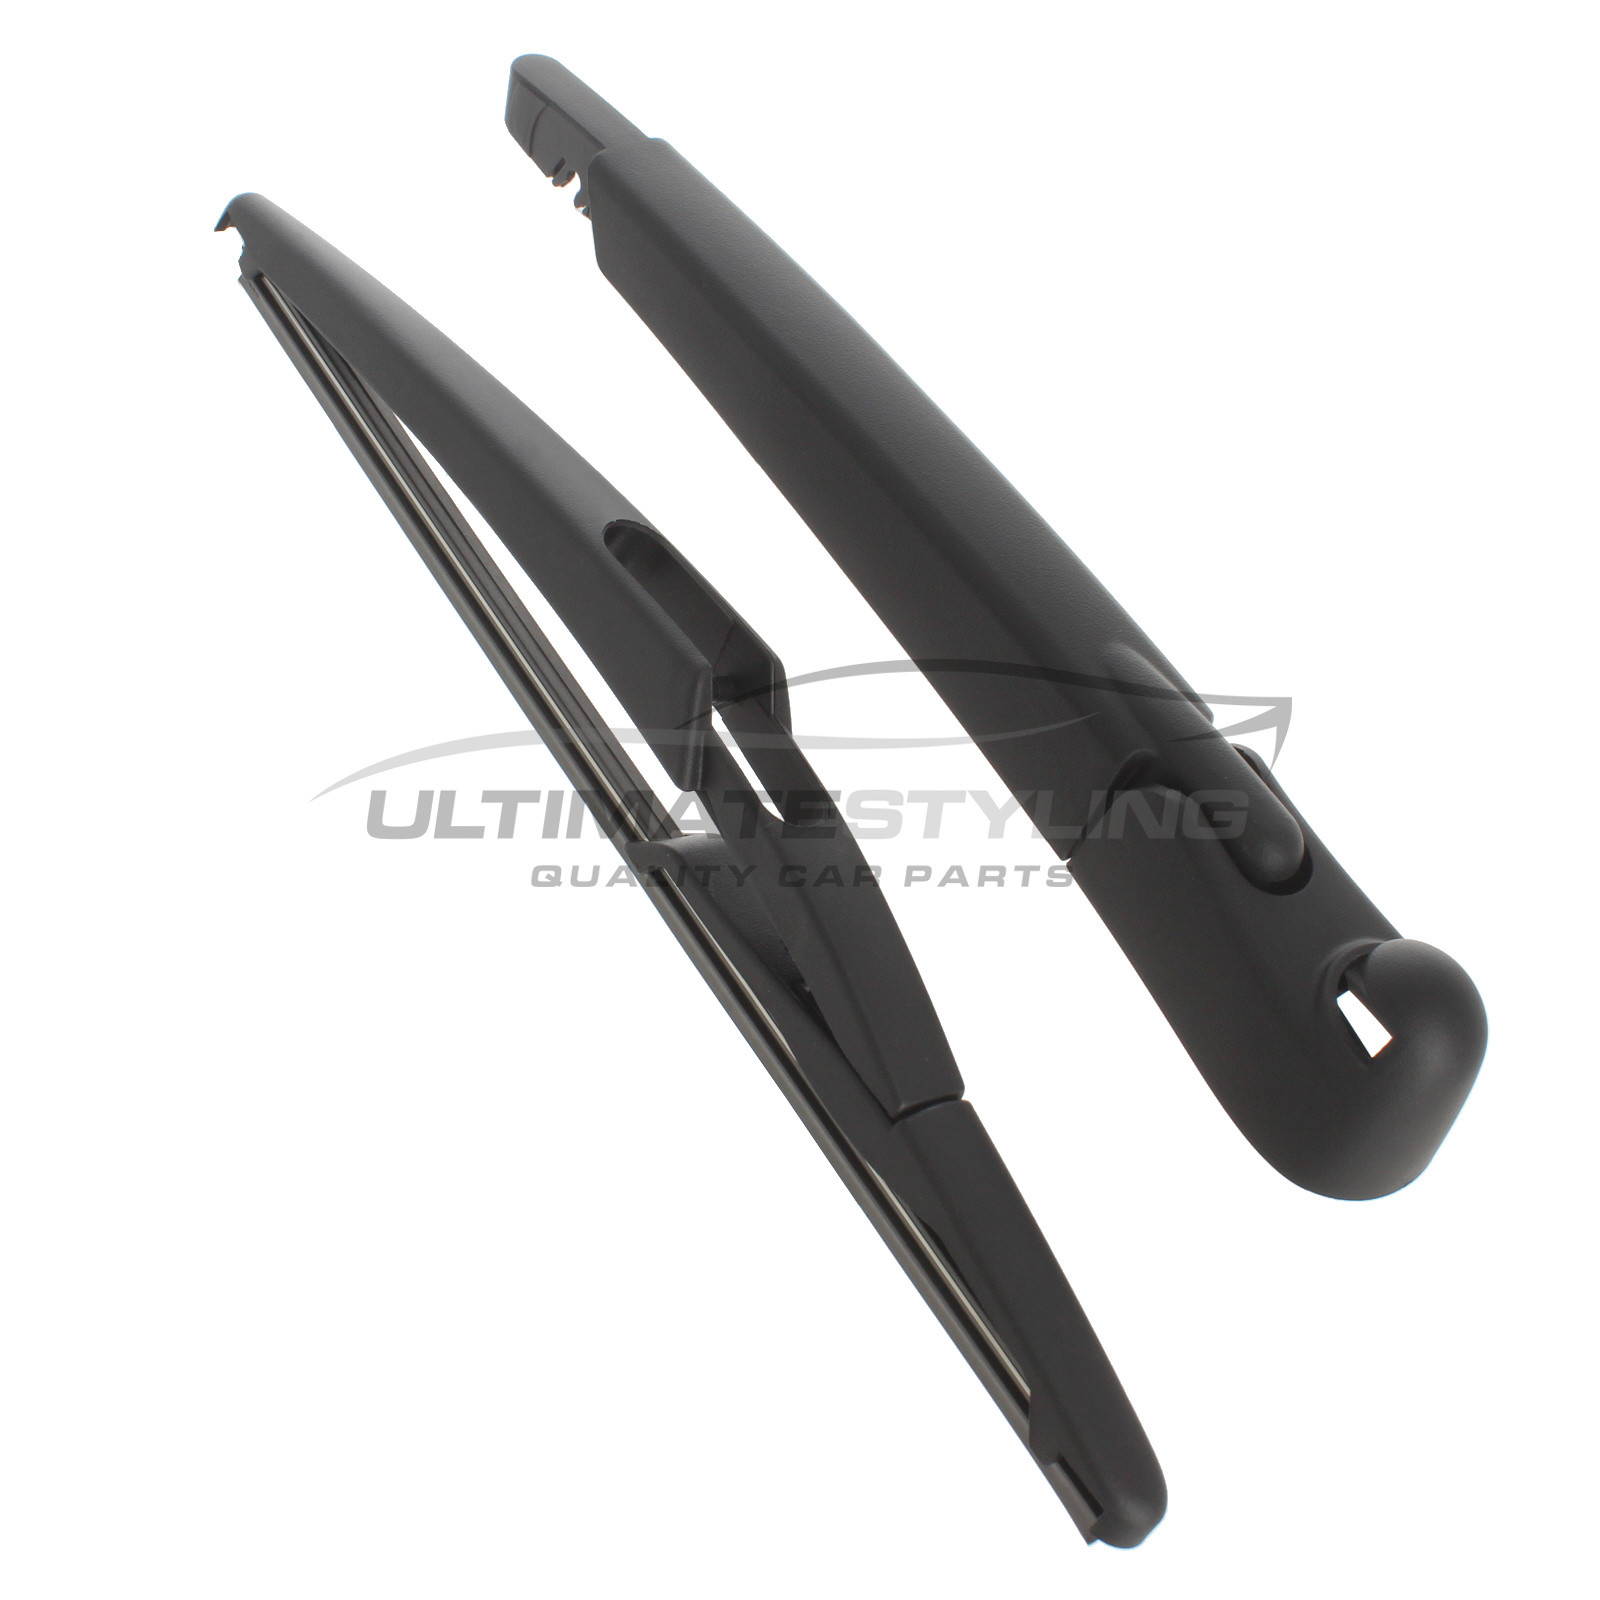 Rear Wiper Arm & Blade Set for Smart Fortwo